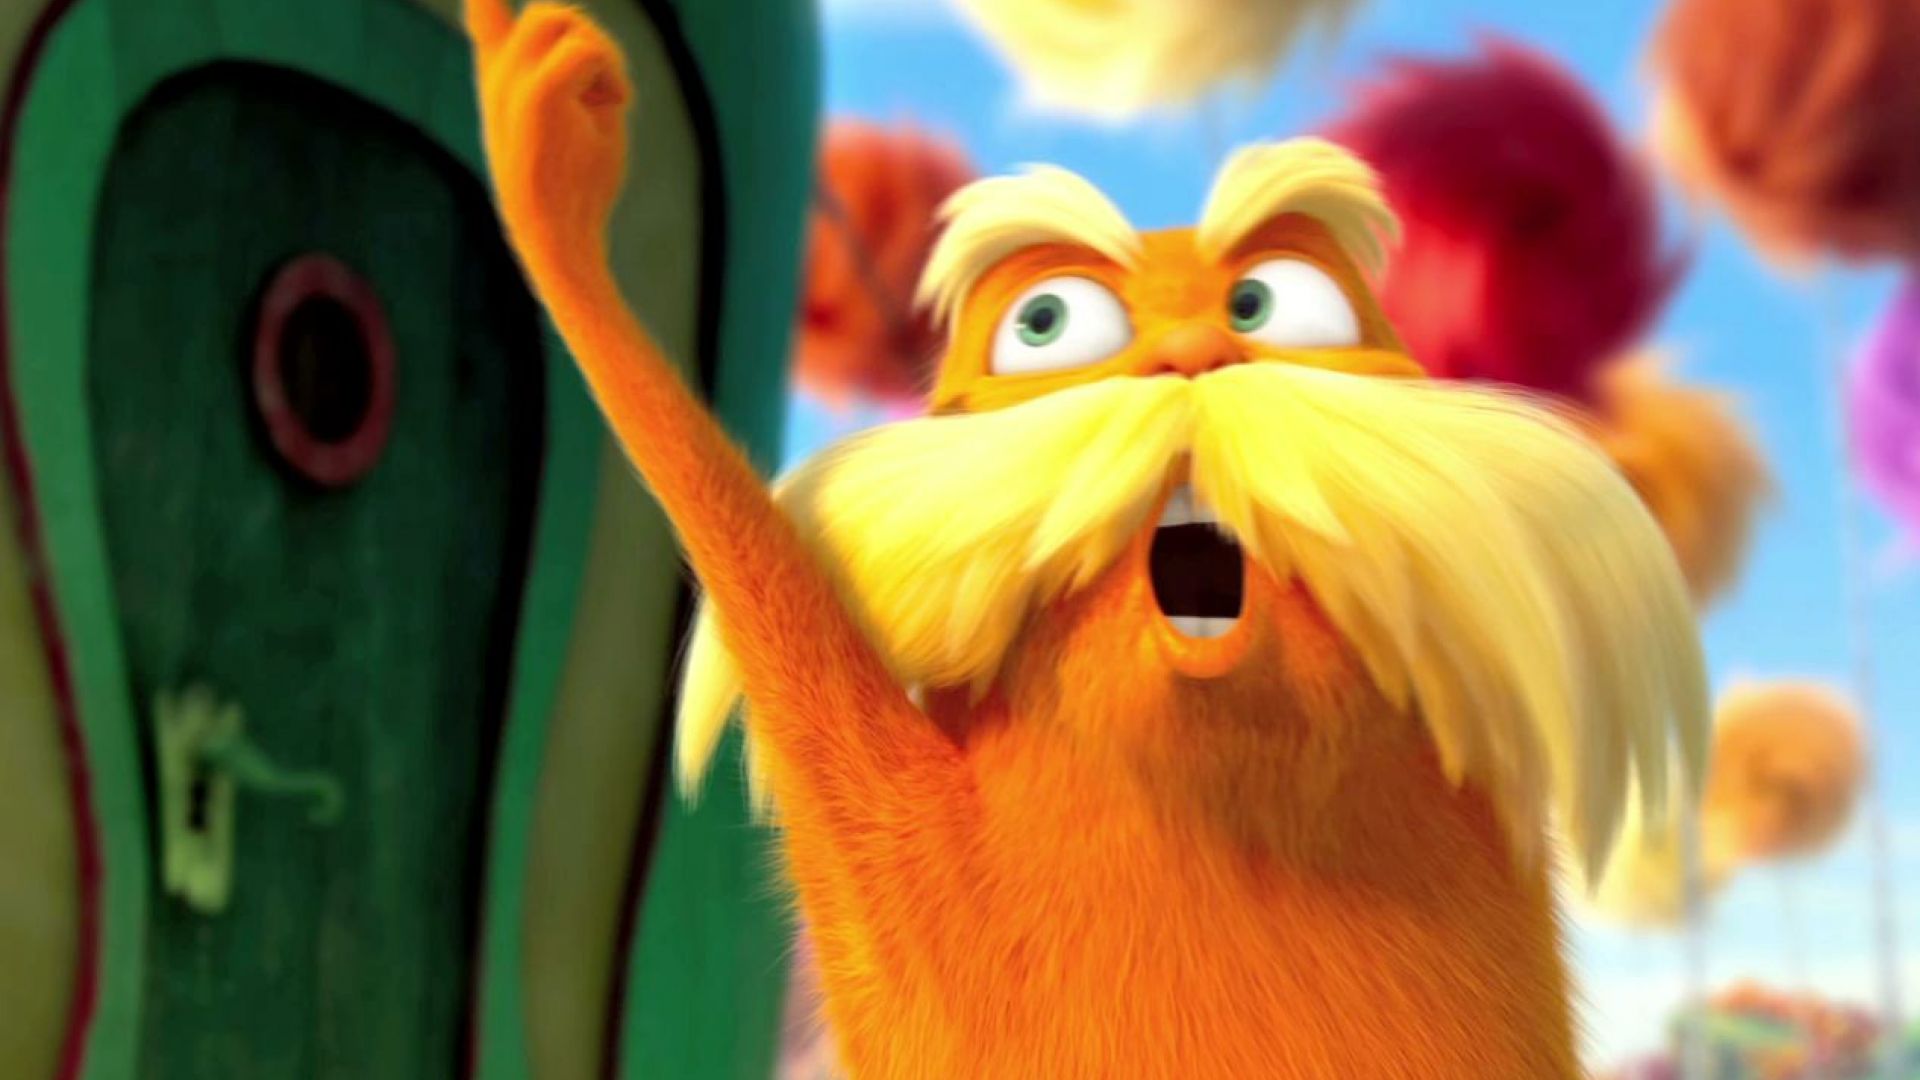 The Lorax featuring Polyphonic Spree - Light and Day, Reach for the Sun | Cultjer1920 x 1080